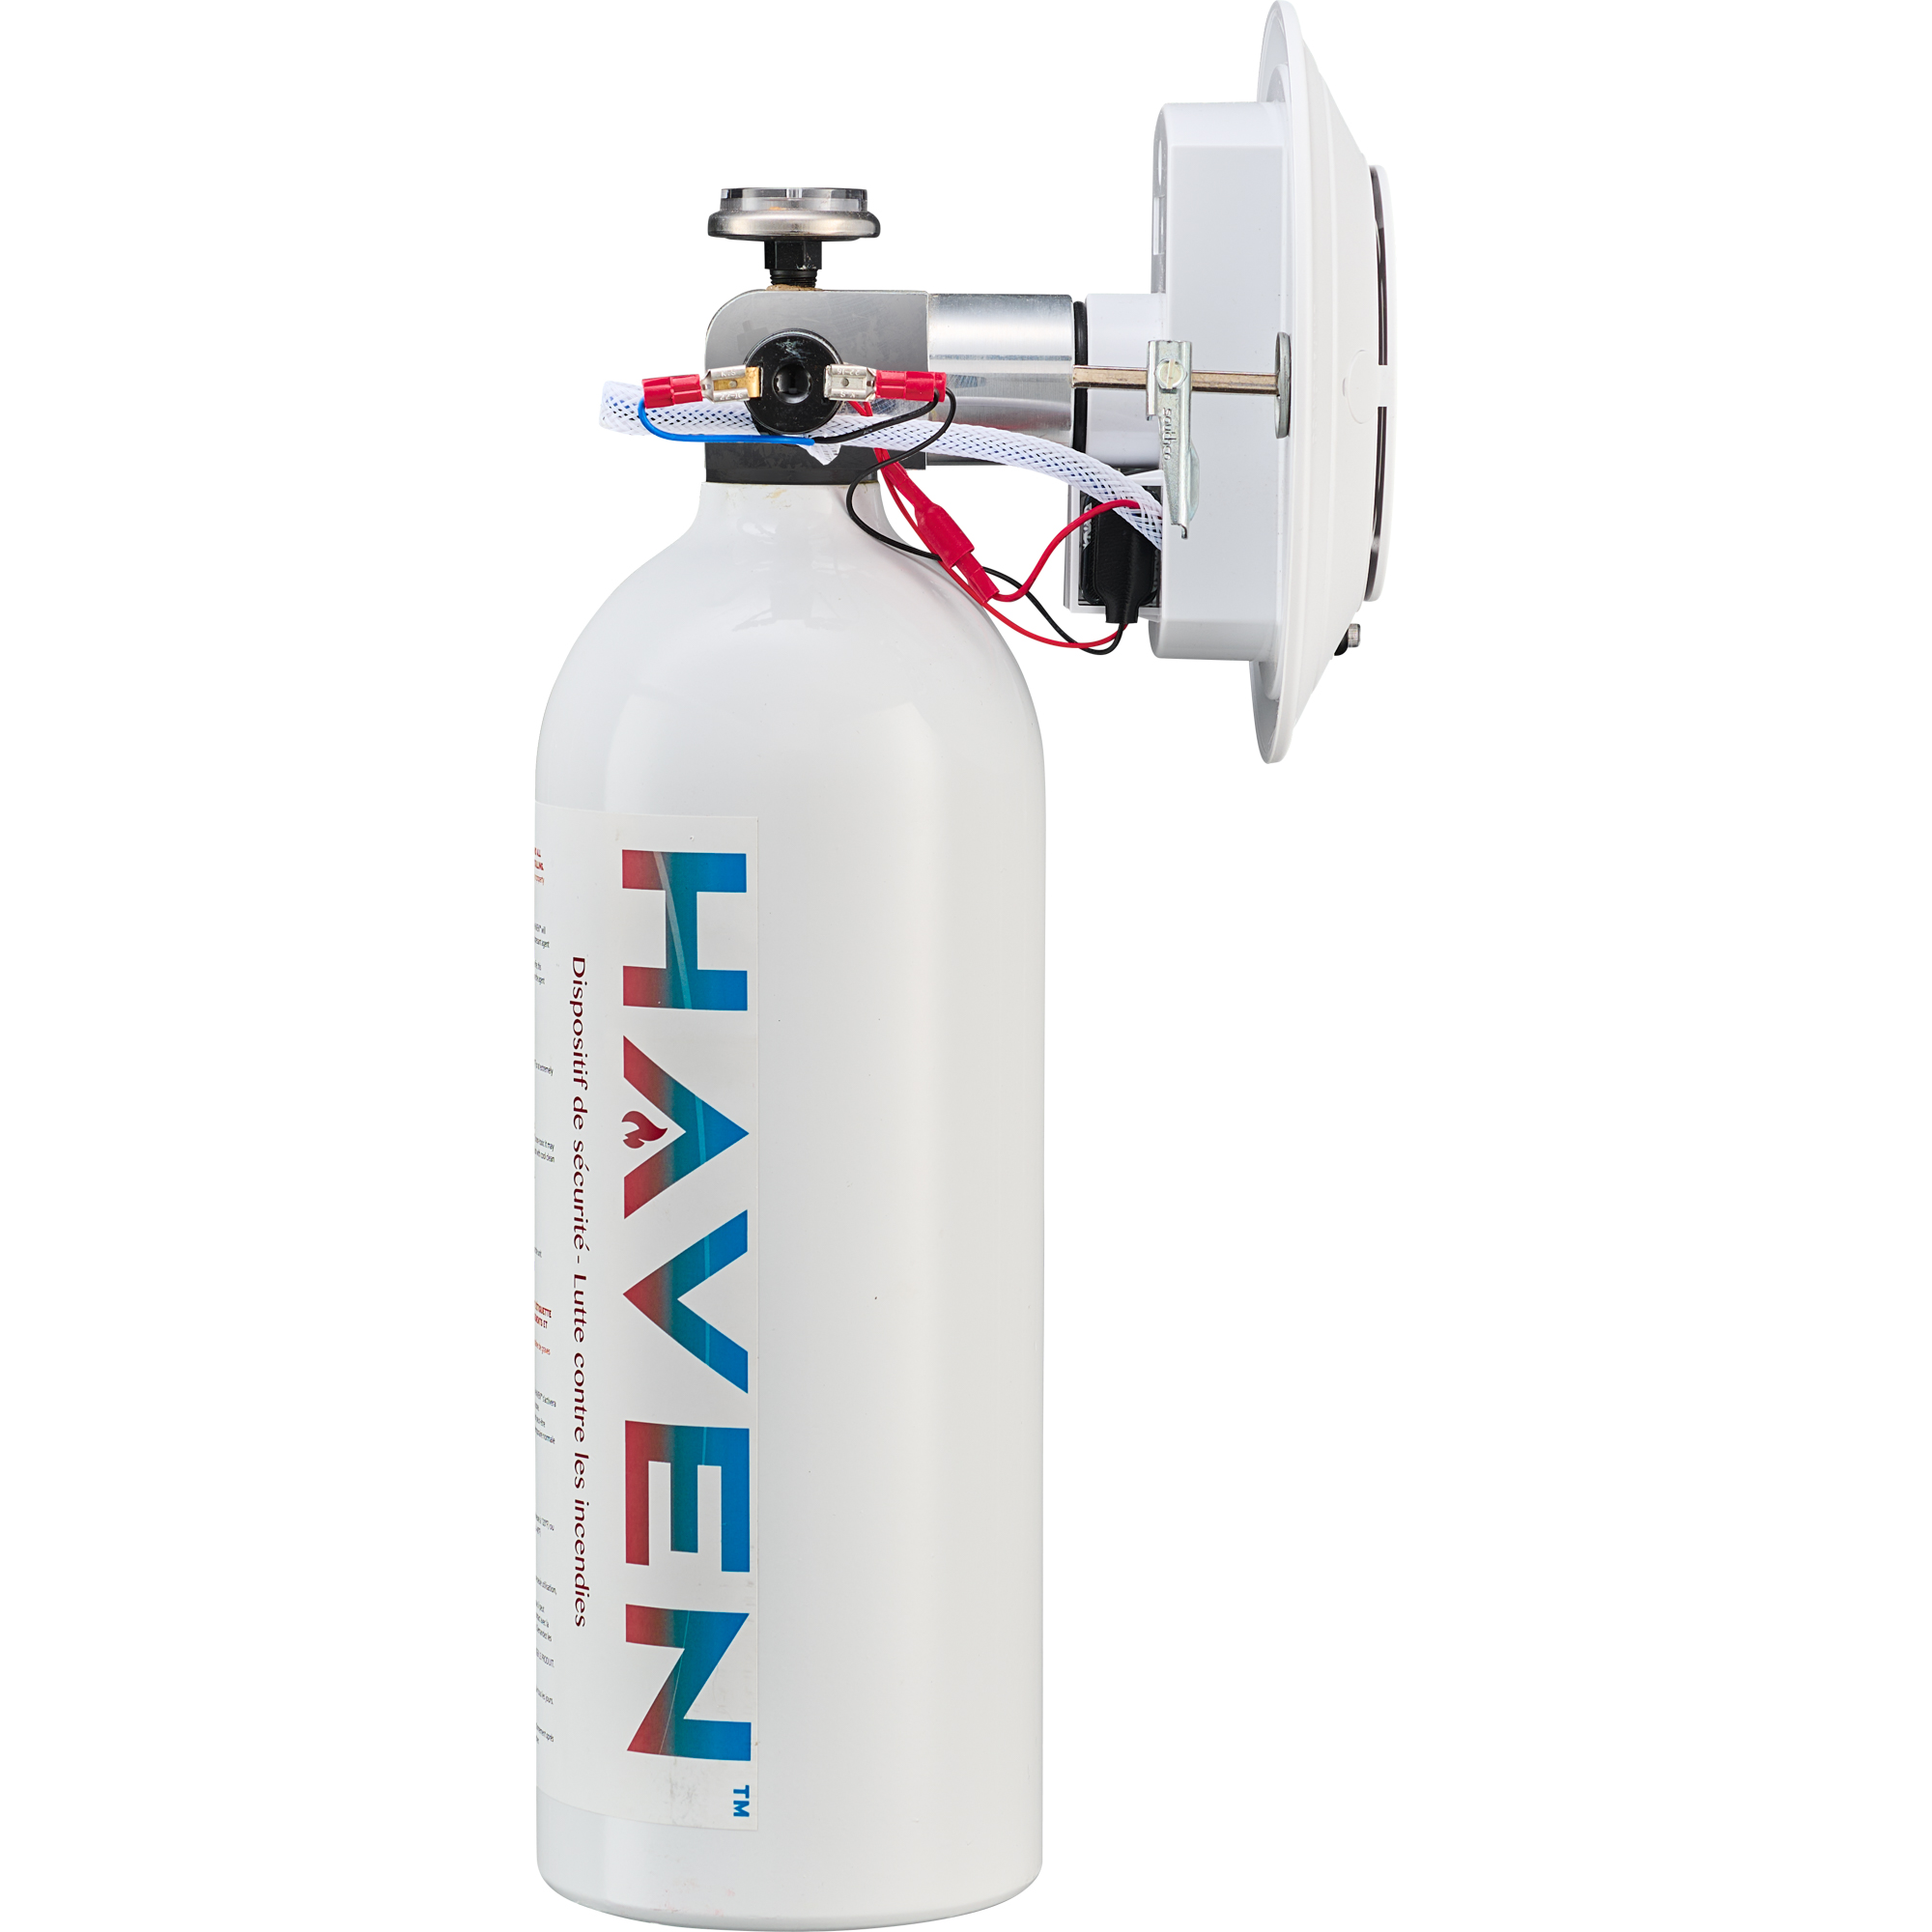 HAVEN Fire Suppression Safety Device 155F - 68C Rated